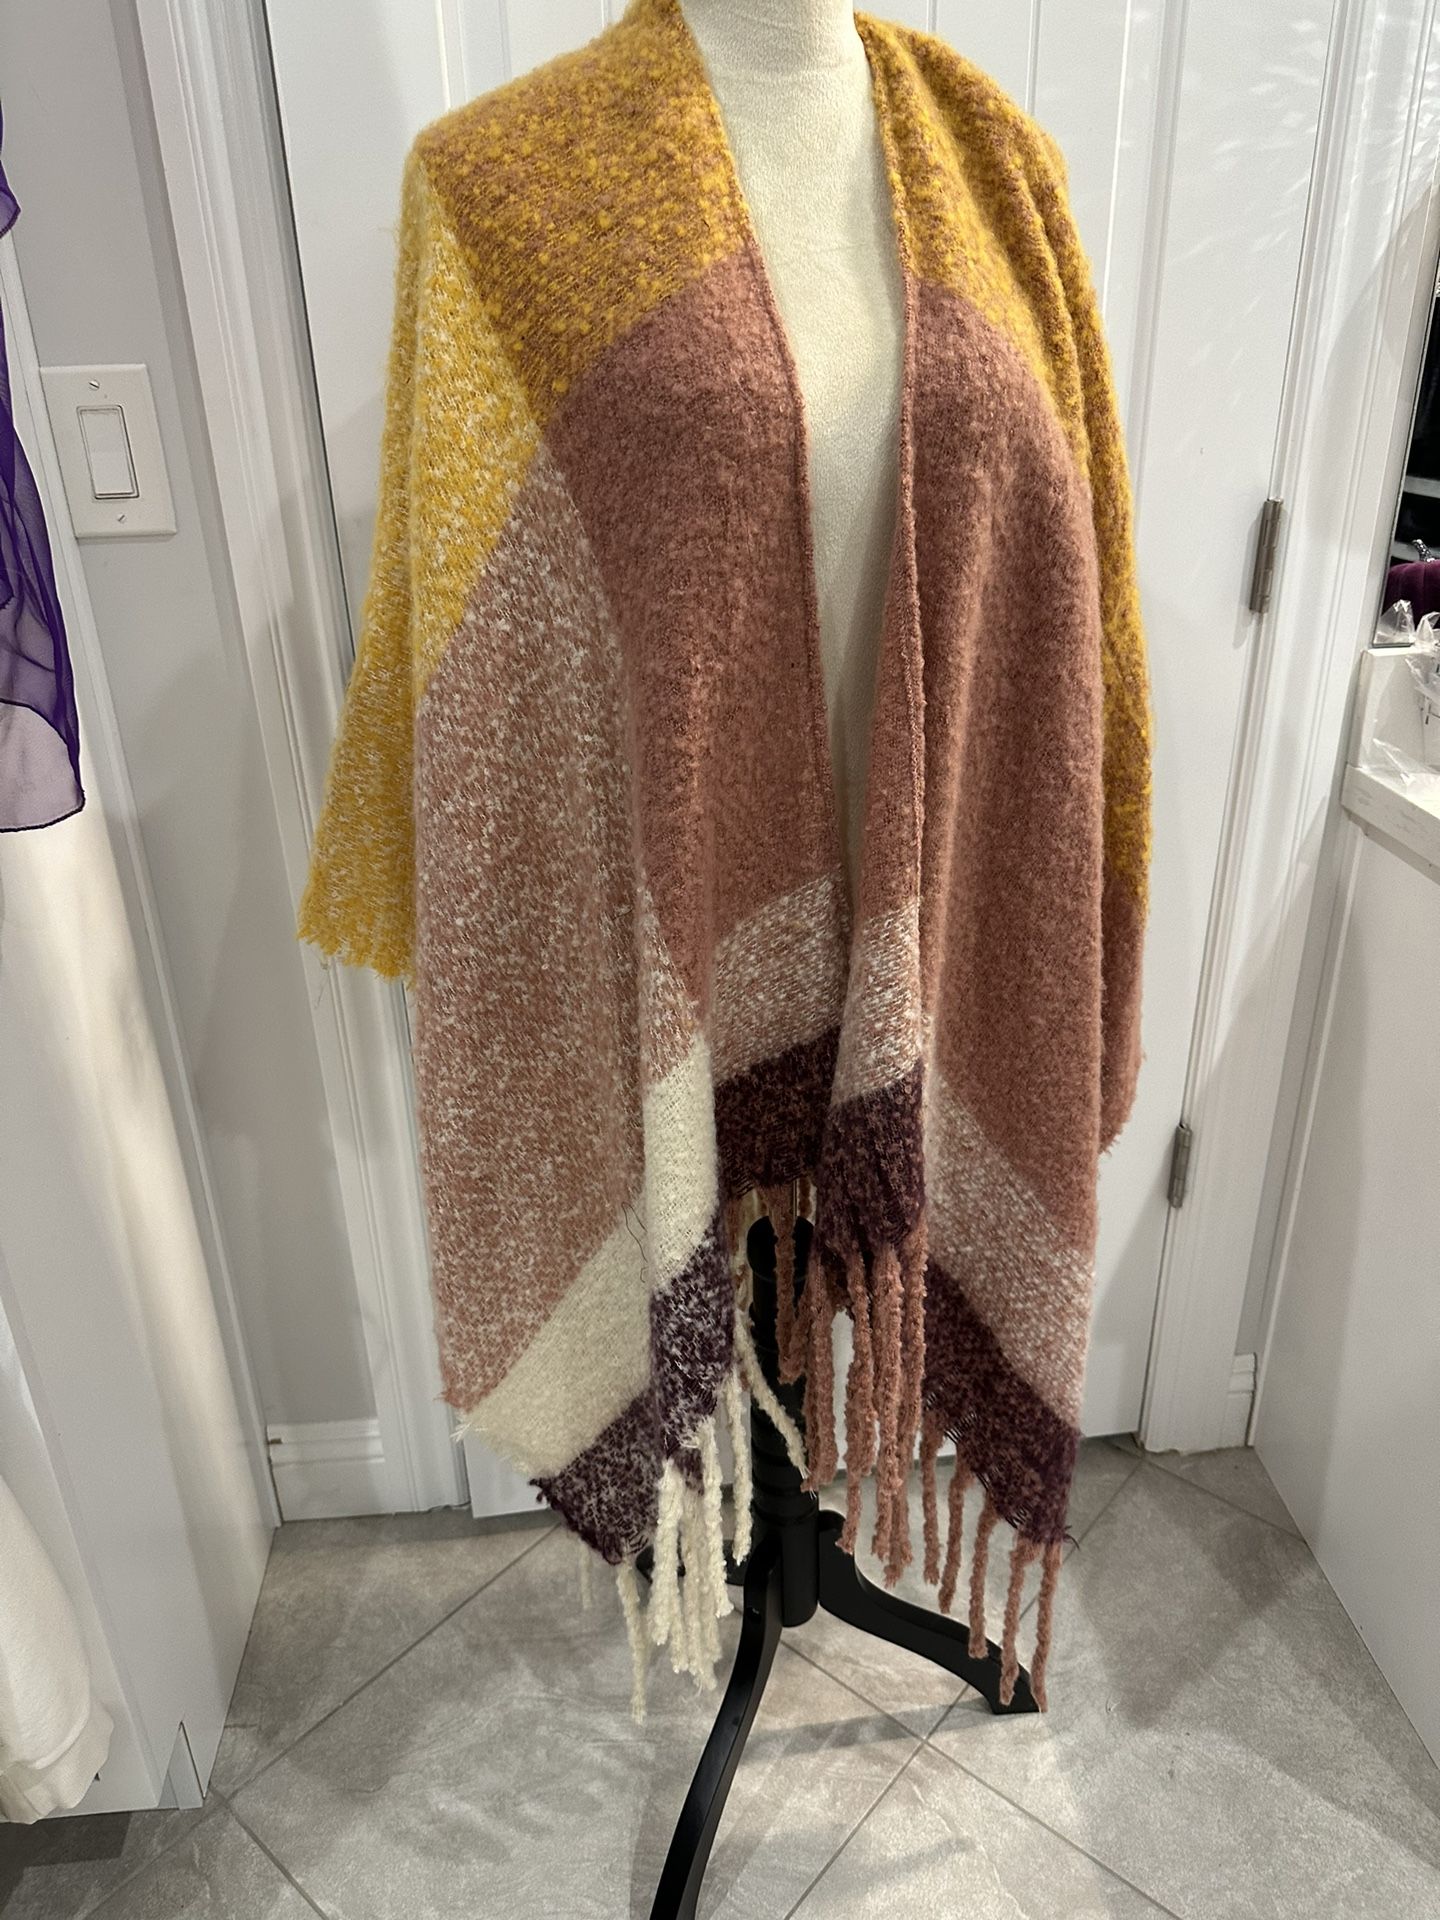 Poncho One Size Fits All $15